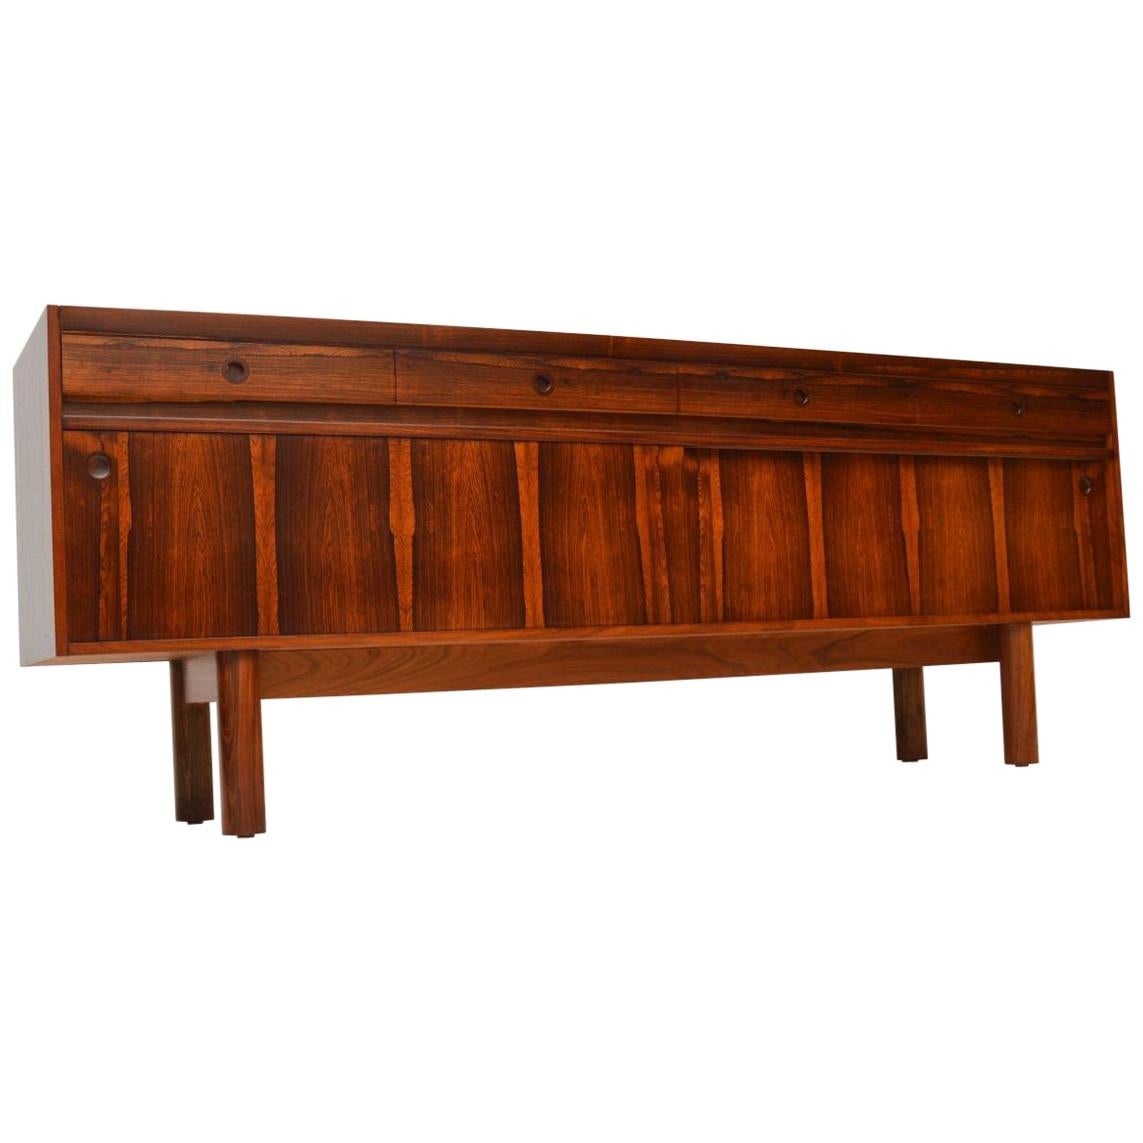 1960s Sideboard by Robert Heritage for Archie Shine